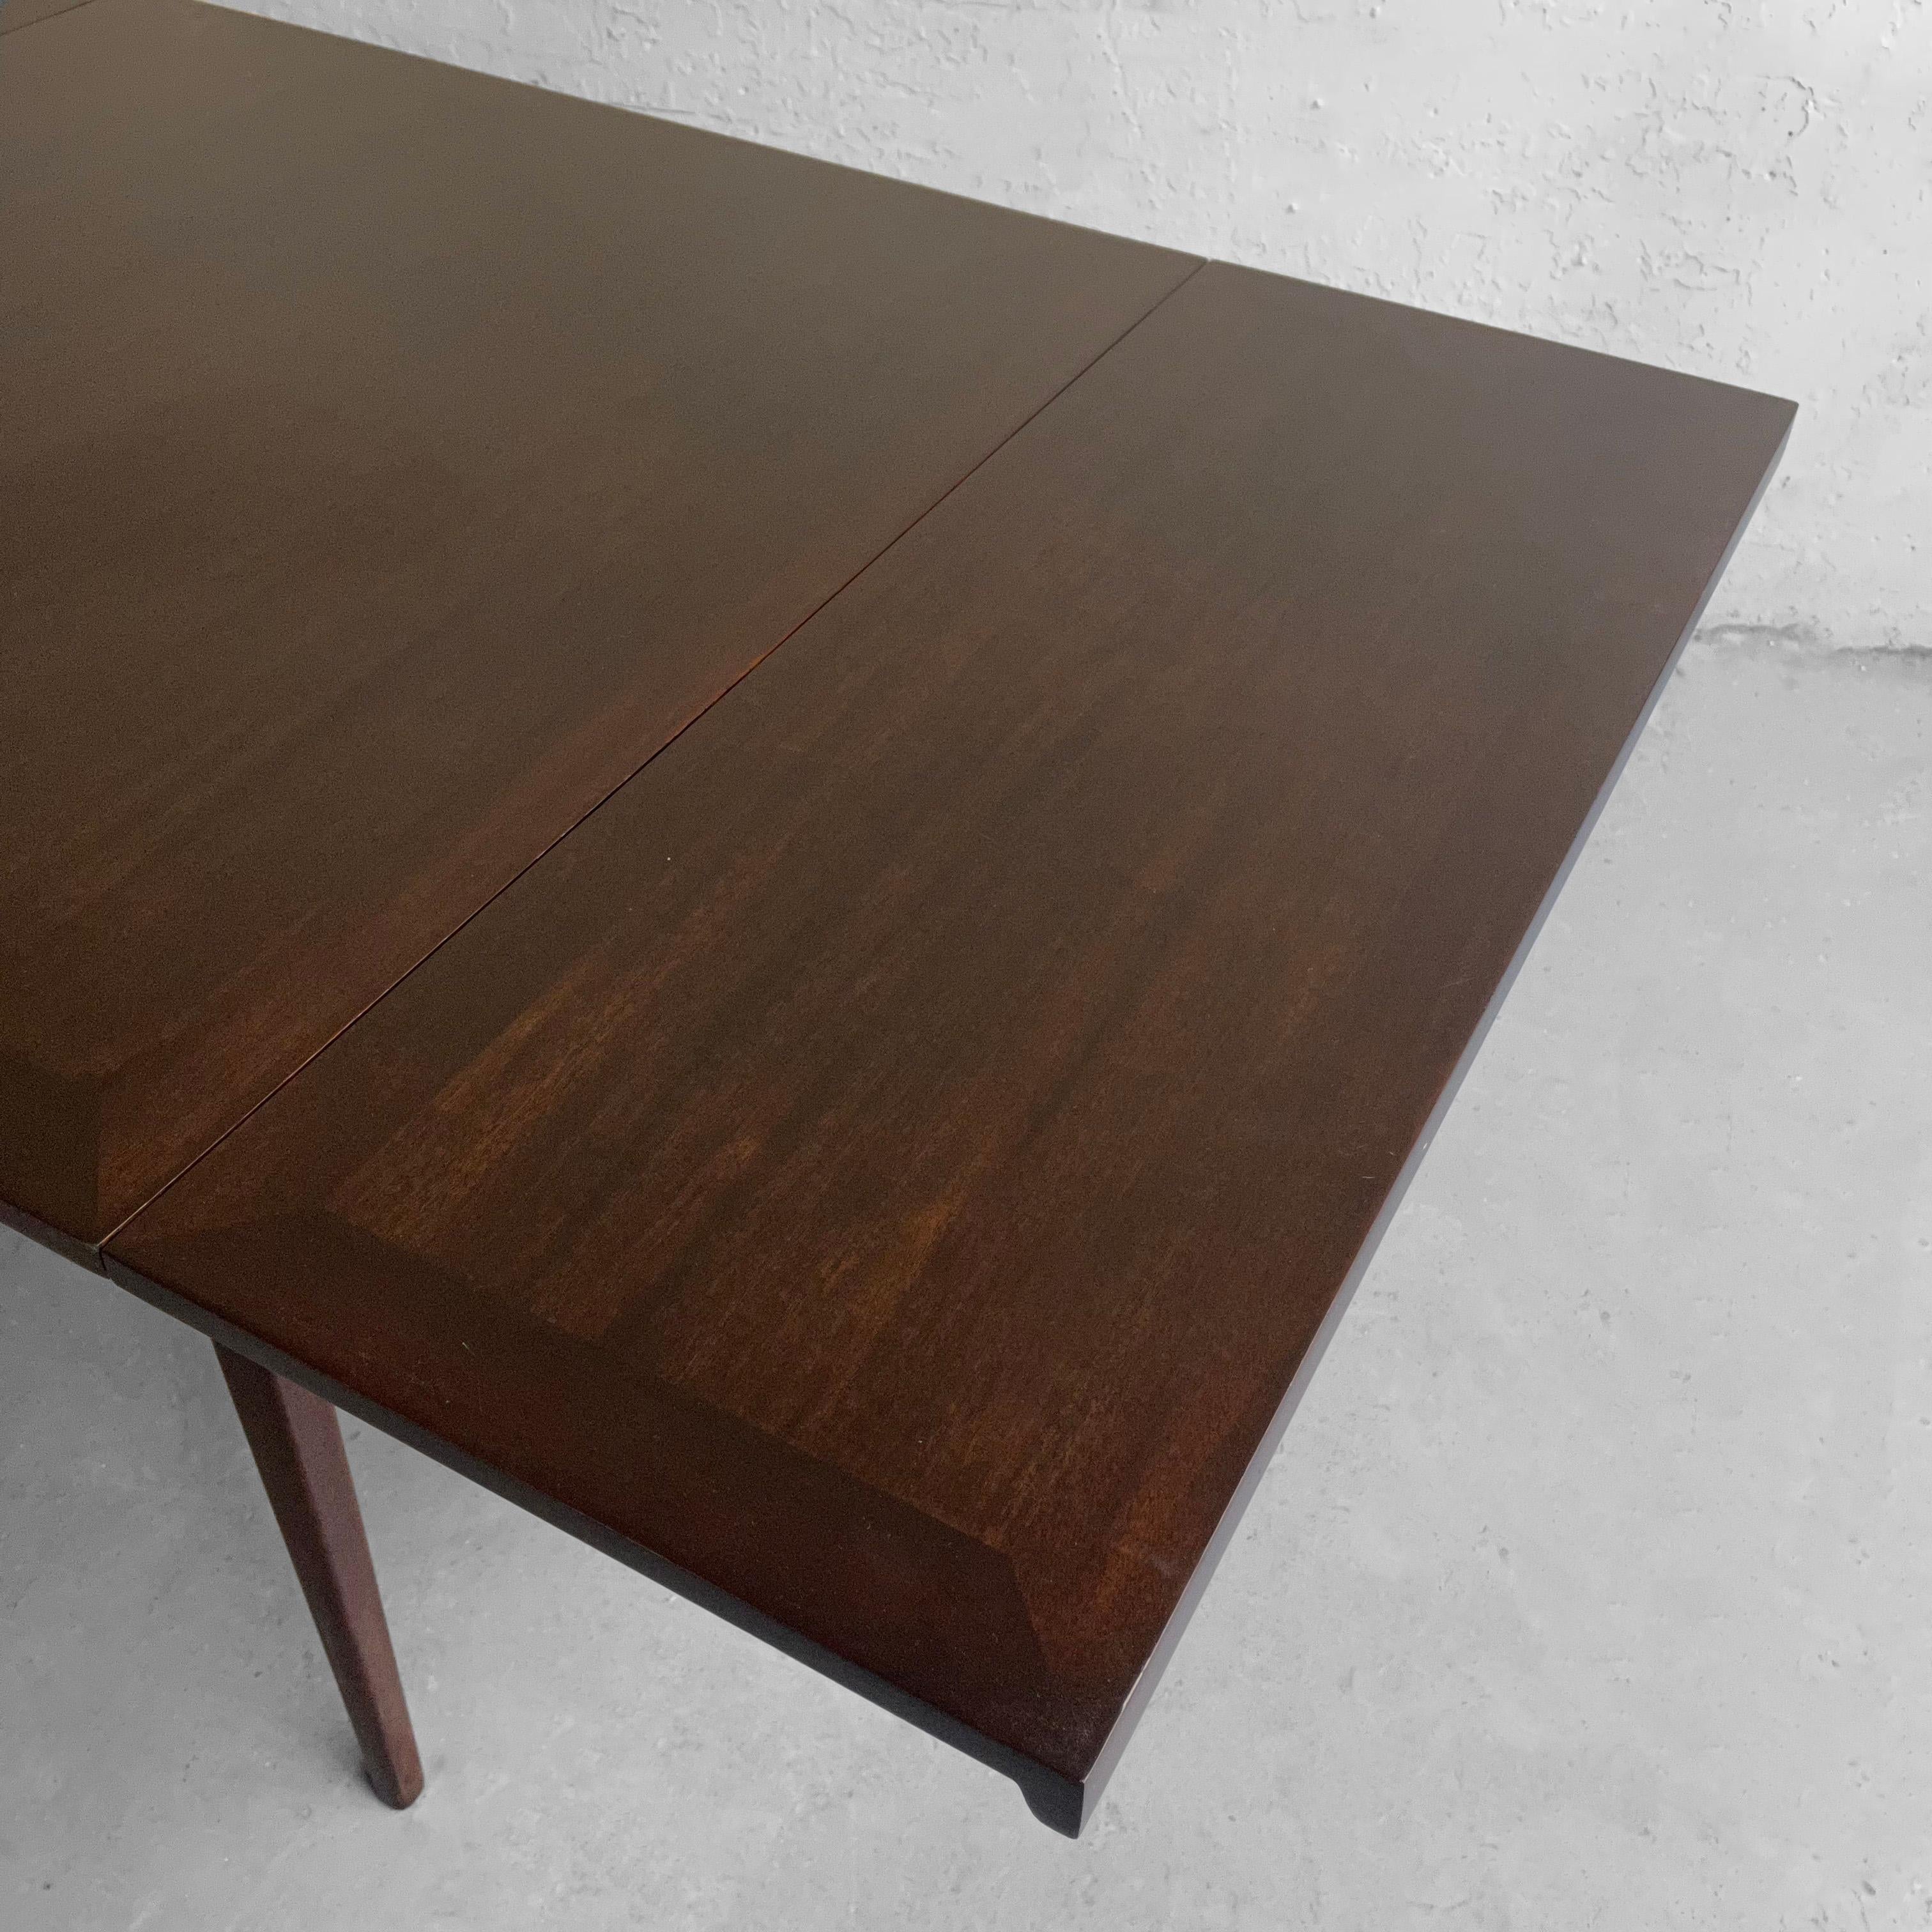 Jens Risom Square Walnut Extension Dining Table In Good Condition For Sale In Brooklyn, NY